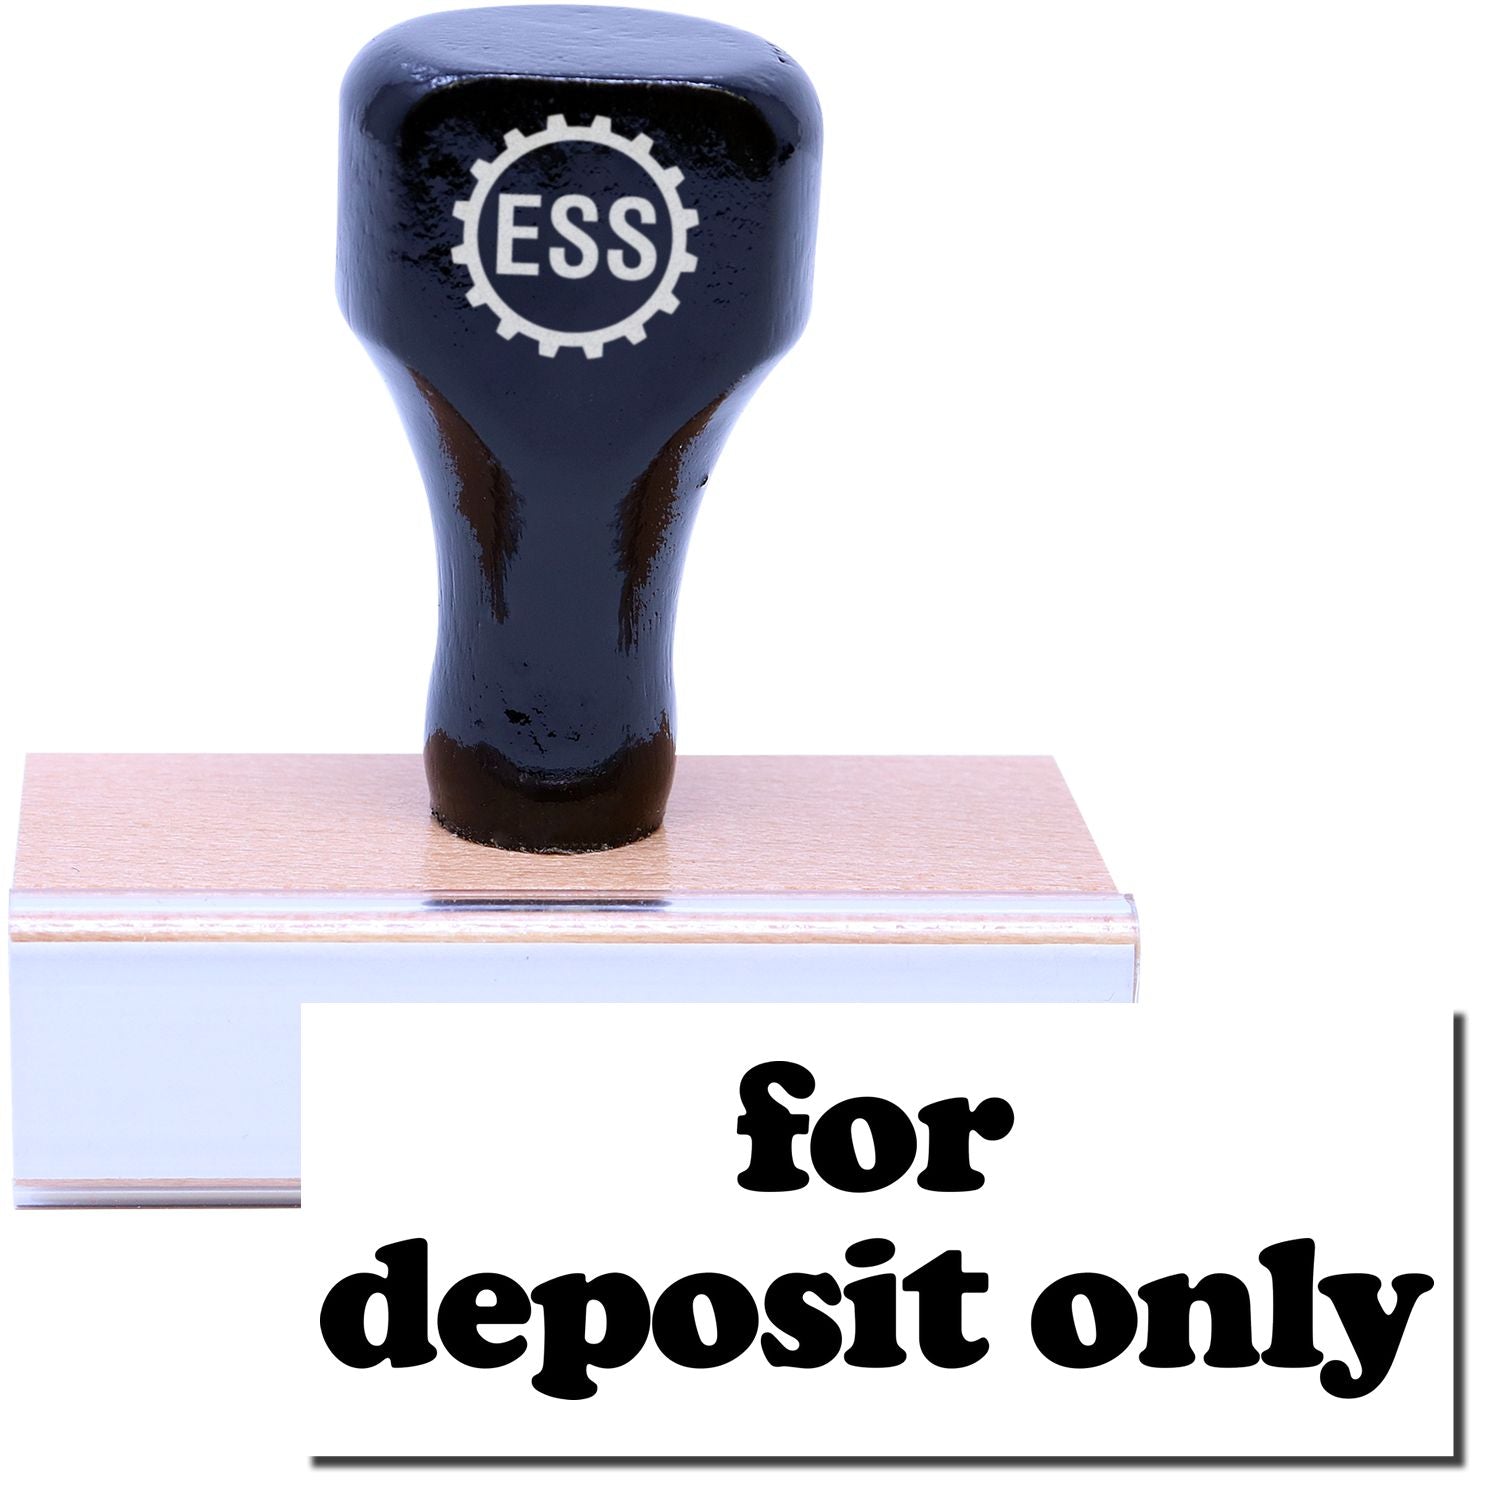 A stock office rubber stamp with a stamped image showing how the text "for deposit only" in a large lowercase font is displayed after stamping.